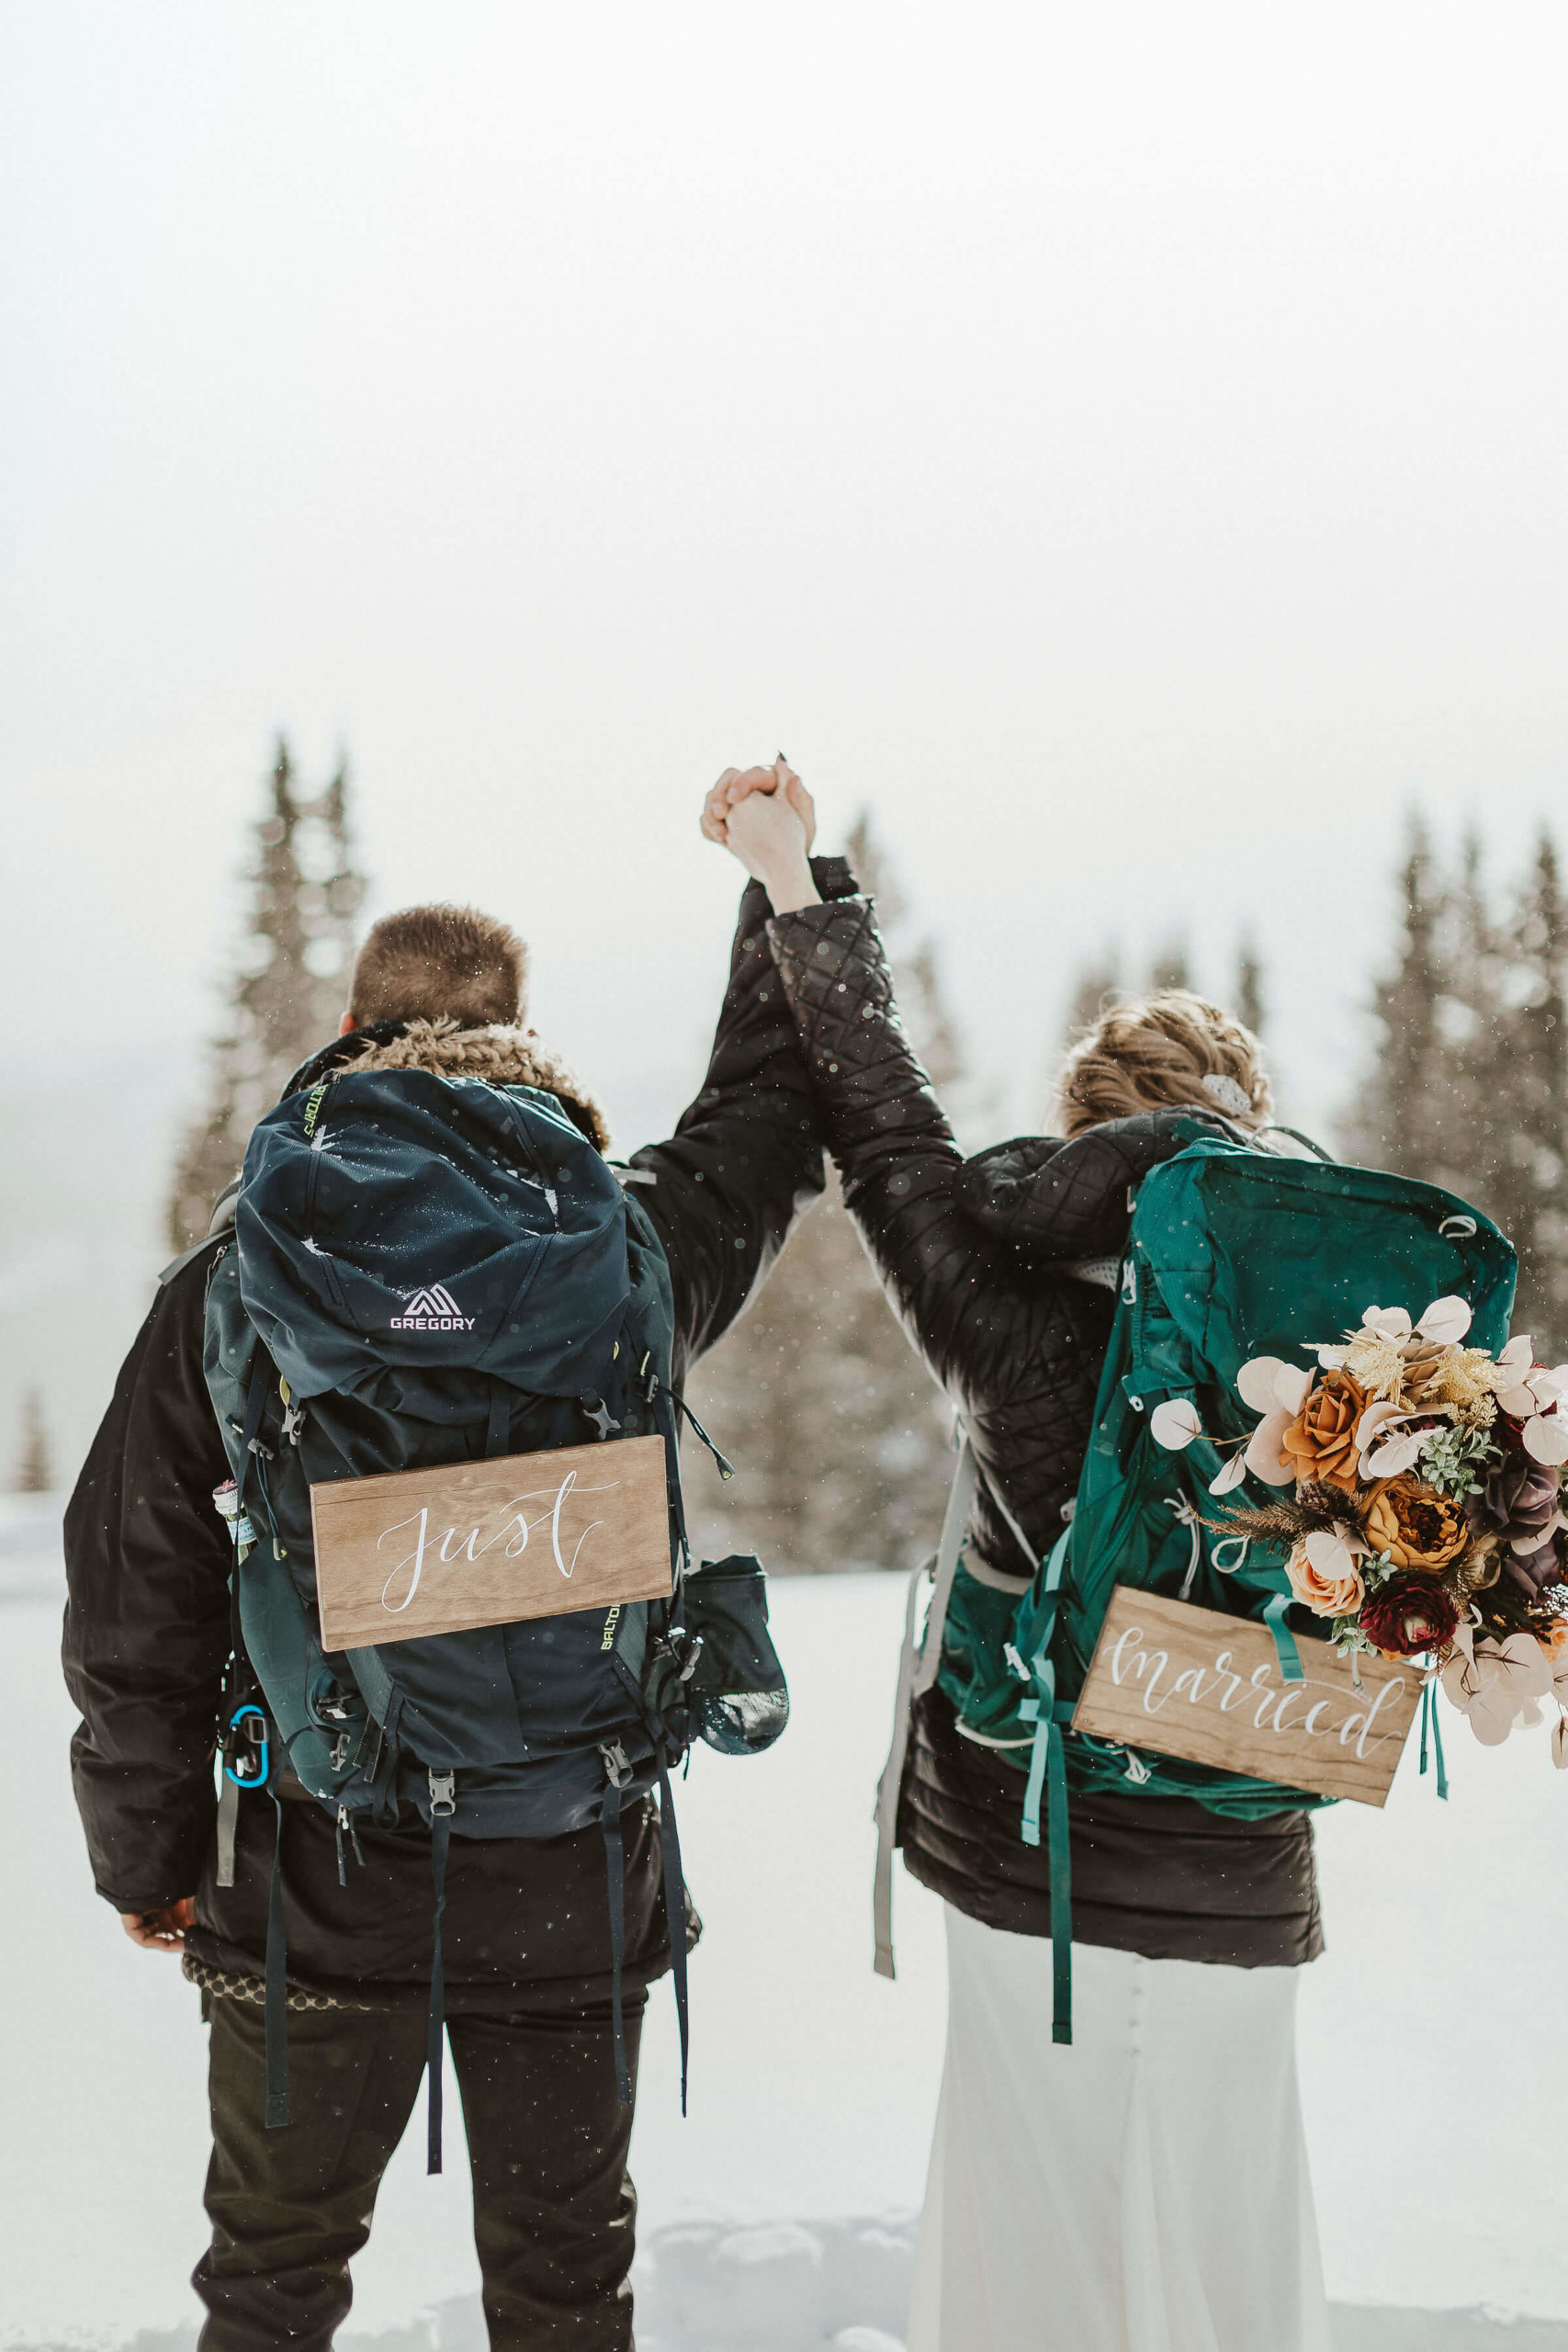 couple eloping with backpacks & signs "just married" - how to make an elopement special